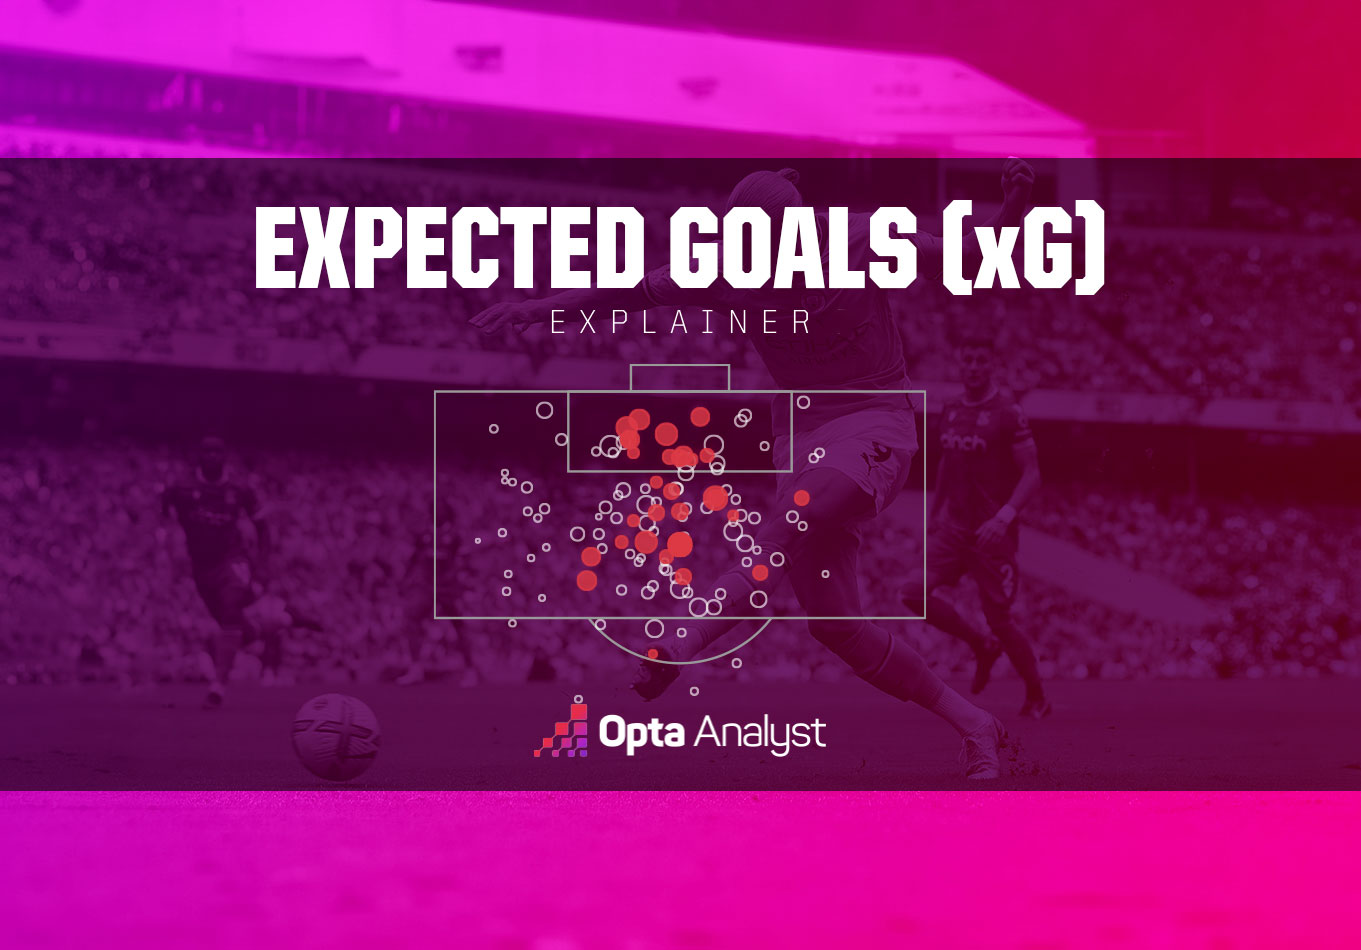 What Is Expected Goals (xG)?